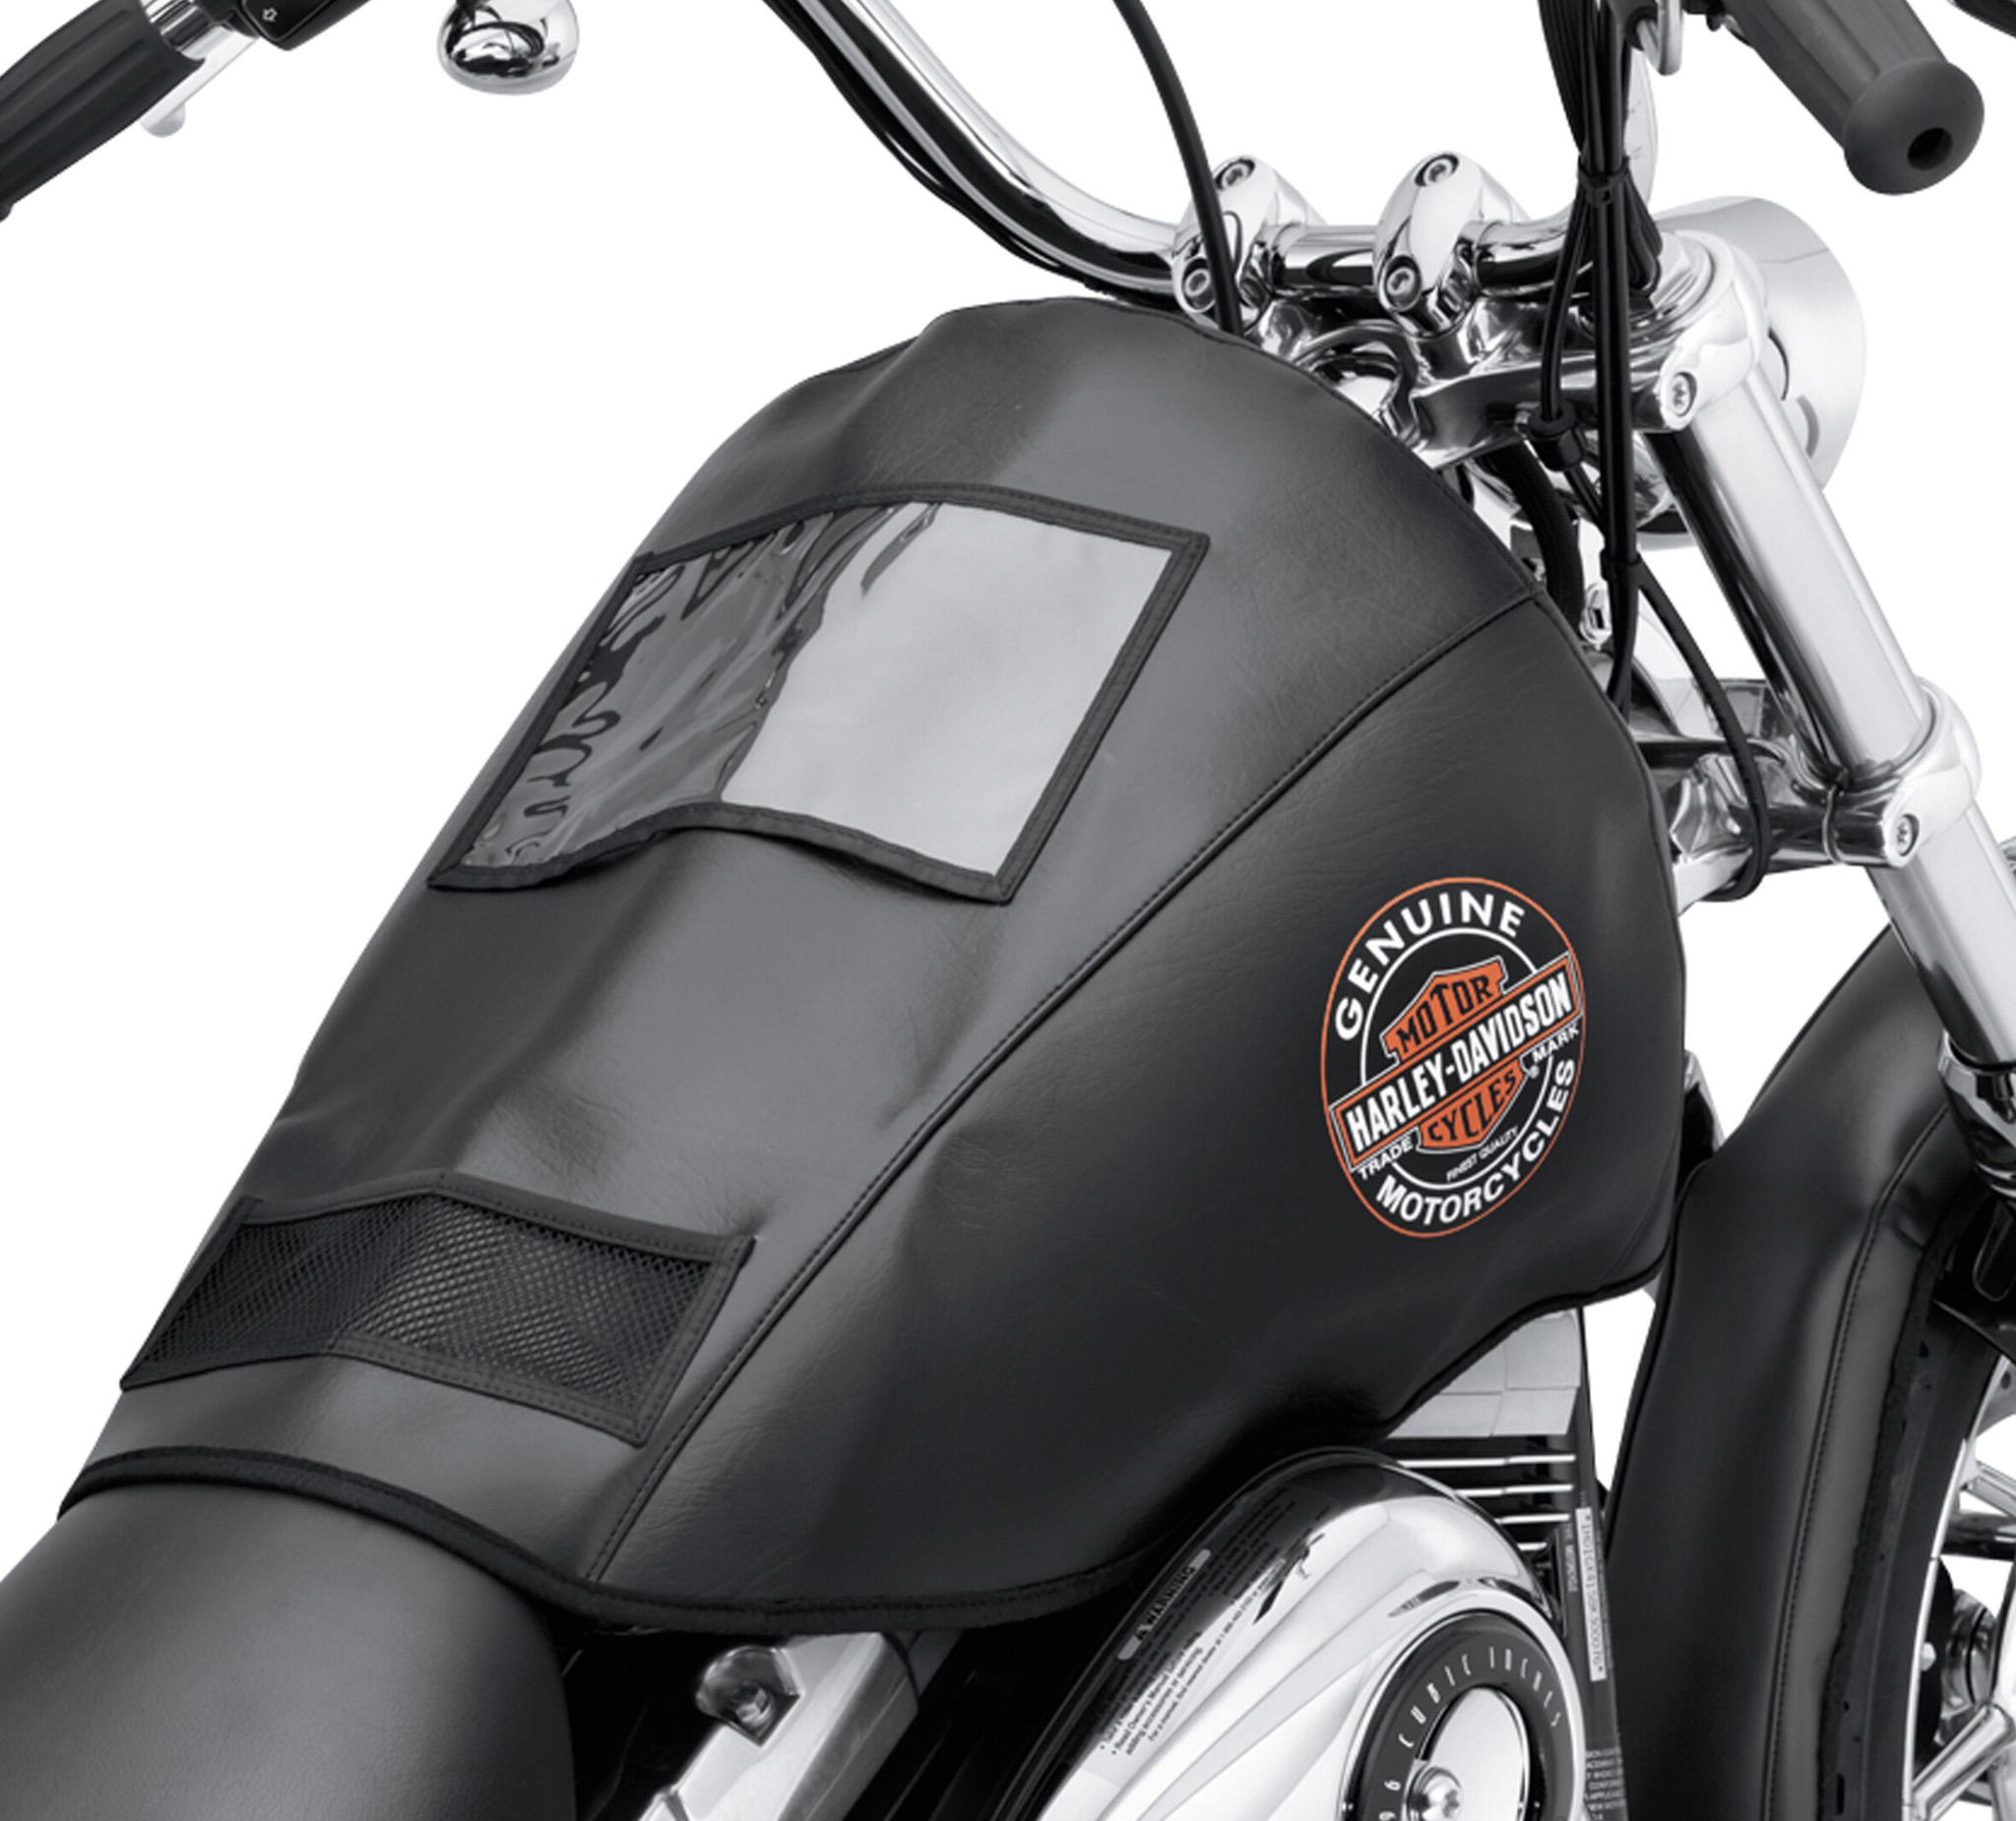 Roadsmith Auxiliary Fuel Tank - Motorcycle & Powersports News